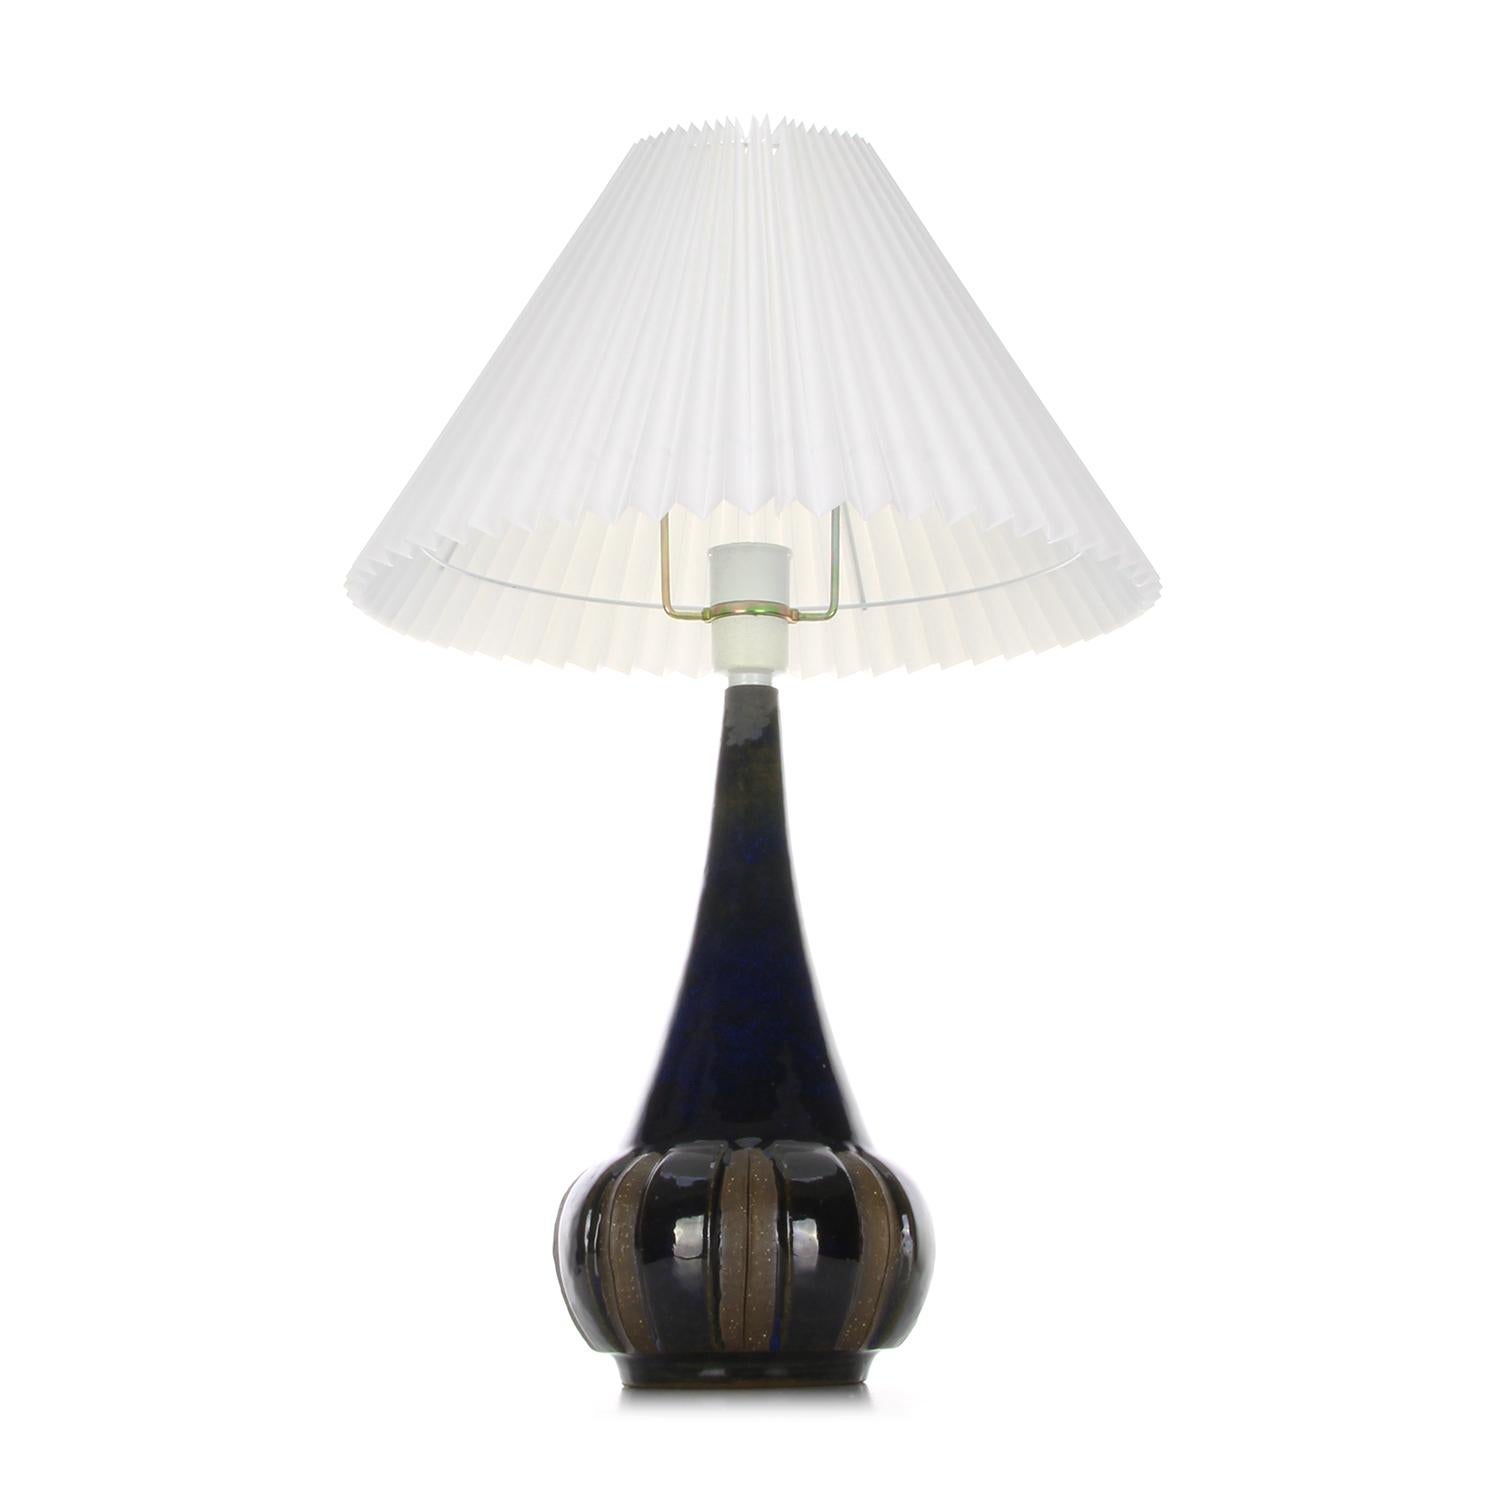 Scandinavian Modern Table Lamp No. 6341 by Marianne Starck, Michael Andersen & Son 1960s, with Shade